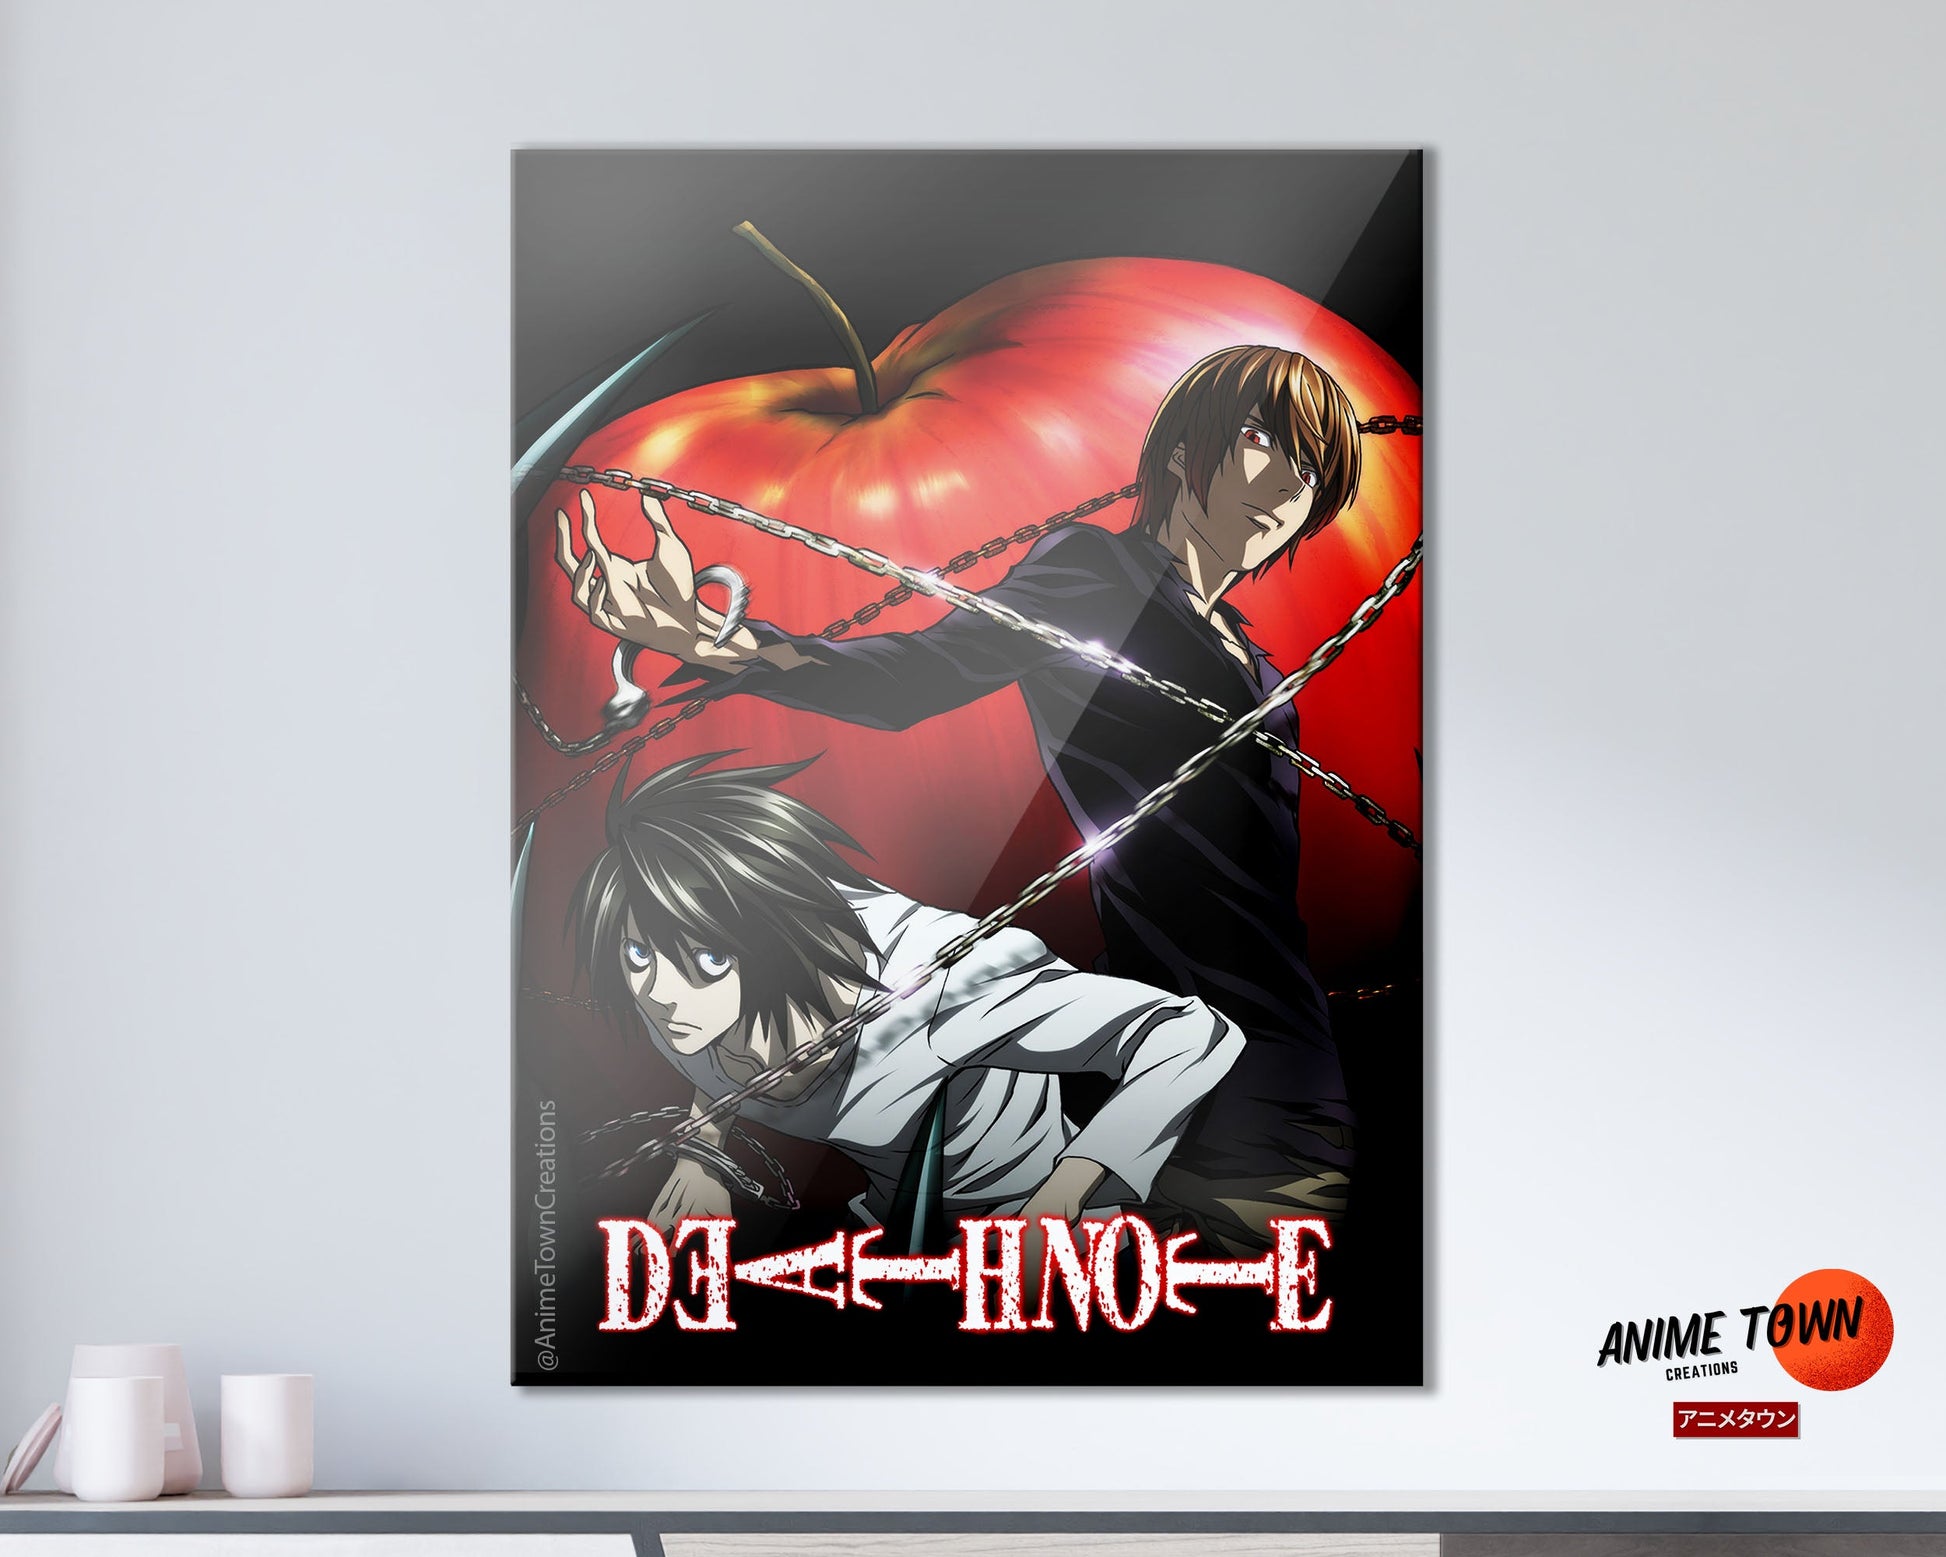 Anime Town Creations Metal Poster Death Note 5" x 7" Home Goods - Anime Death Note Metal Poster